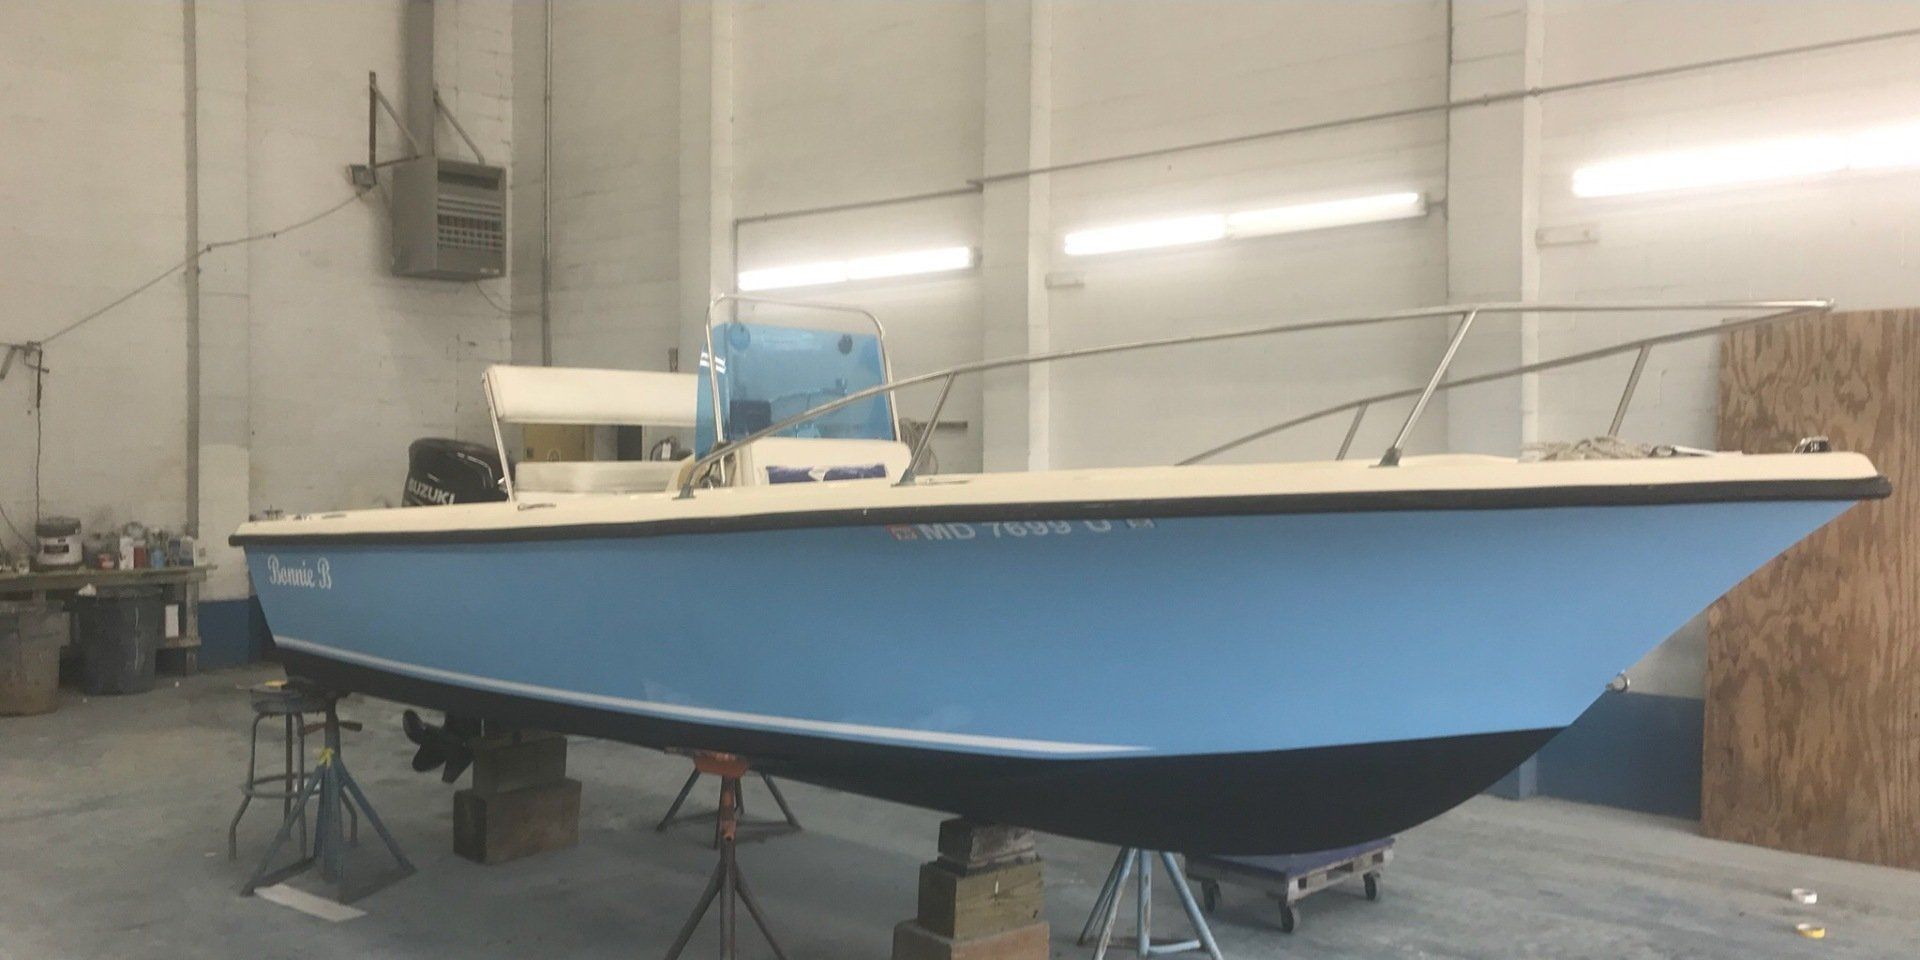 a blue and white boat is sitting in a warehouse .